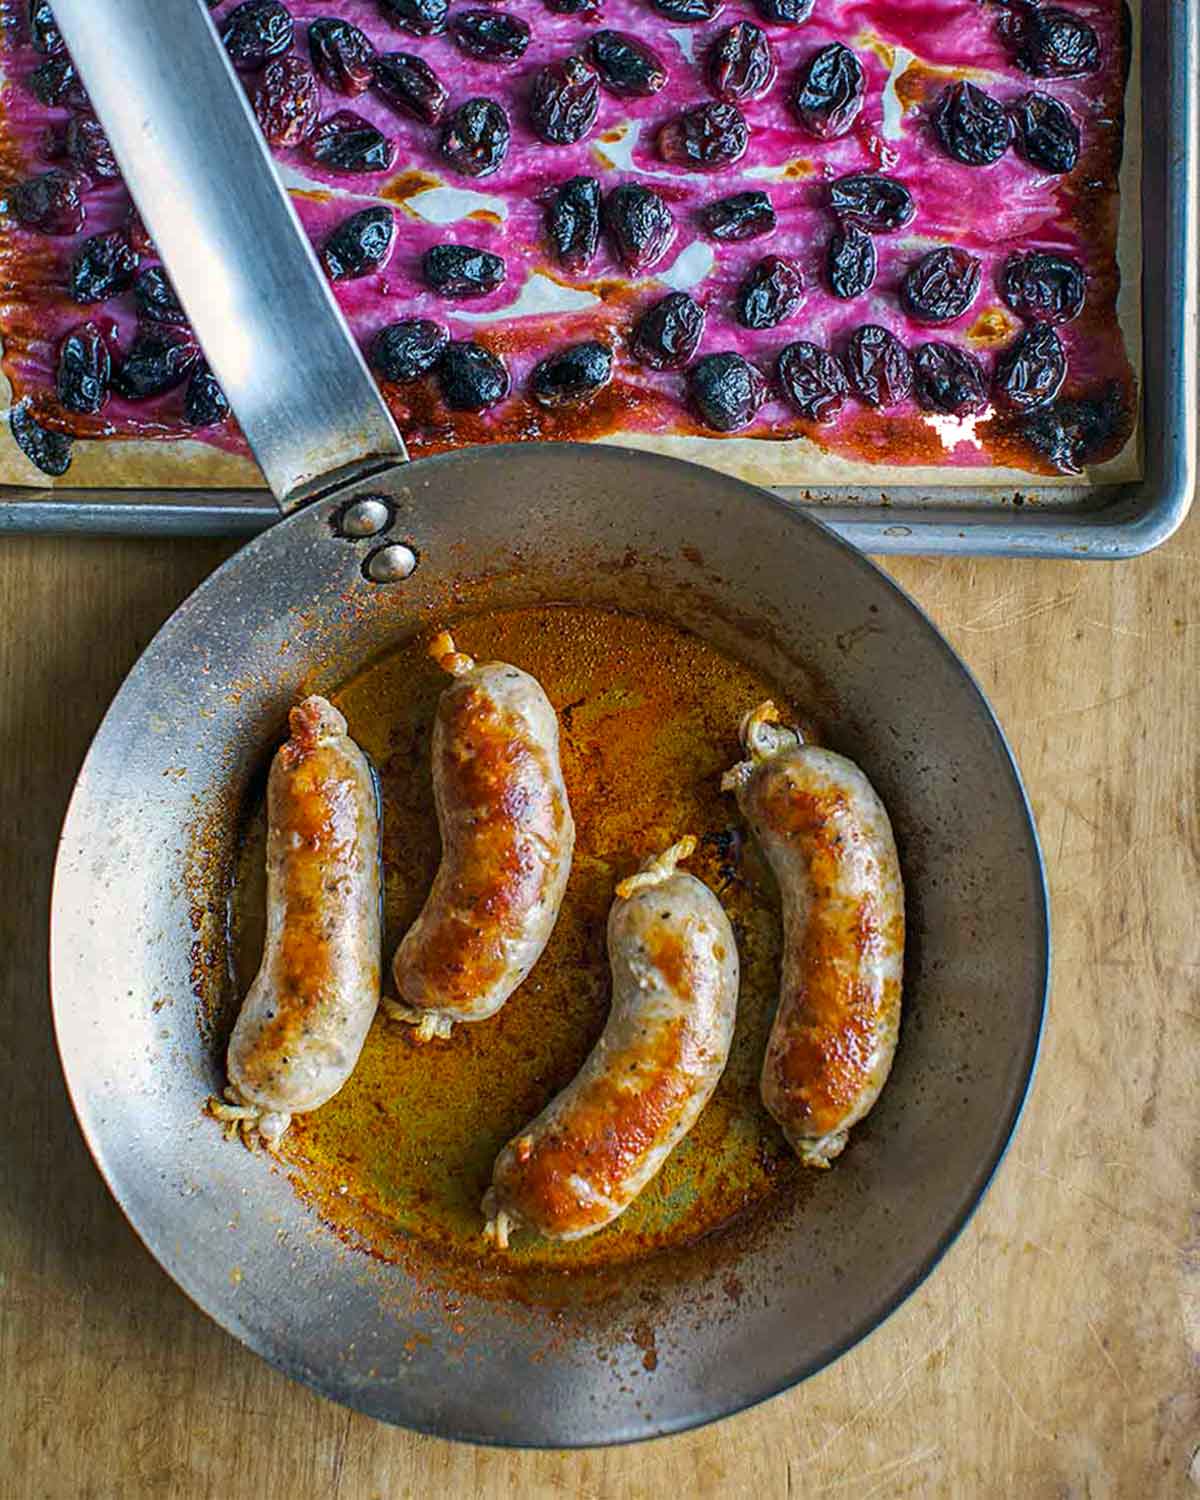 Skillet with four seared pork sausages with roasted grapes on a baking sheet nearby.